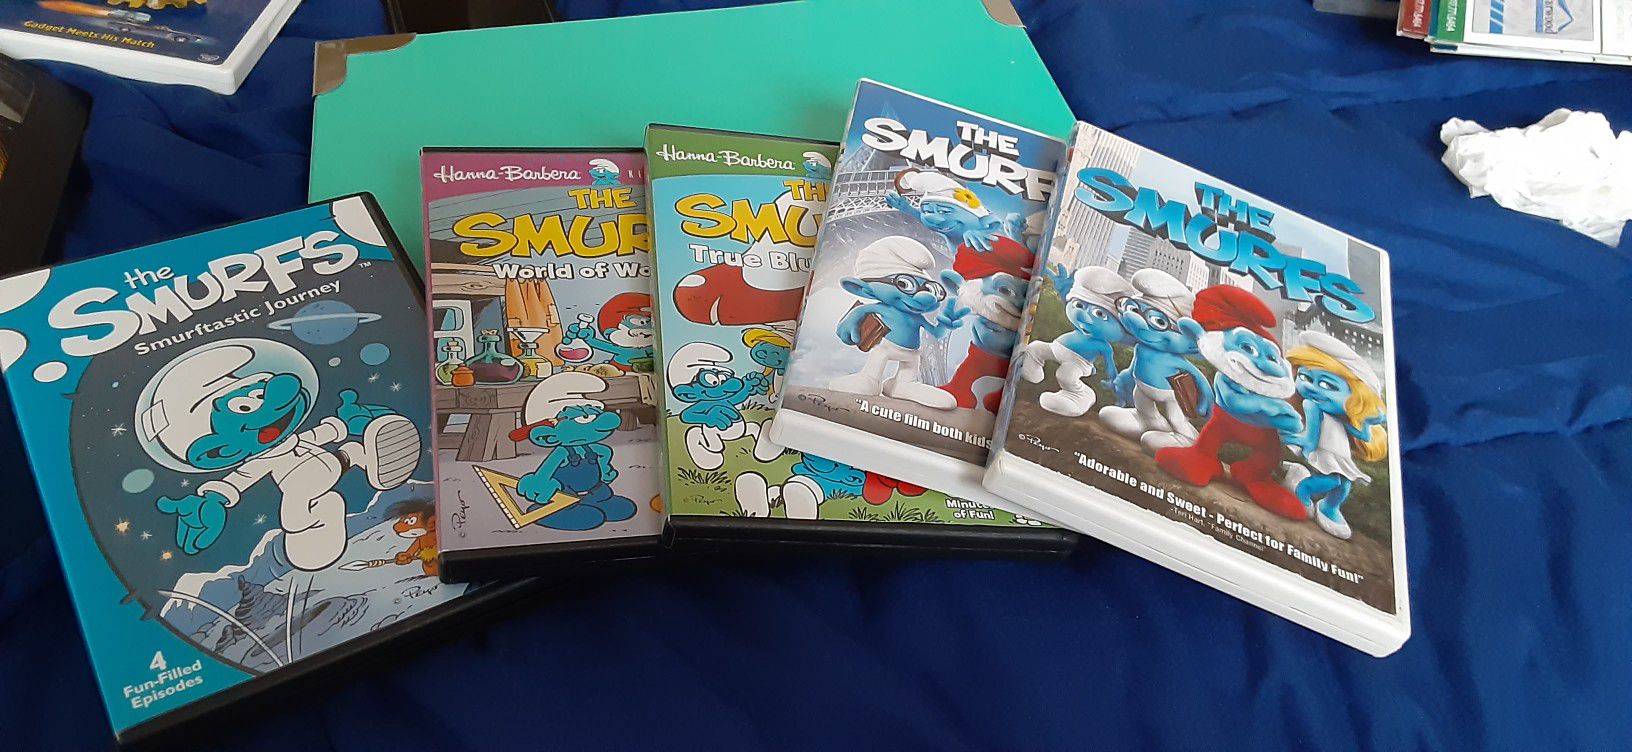 The Smurfs!! Great collection of DVD's